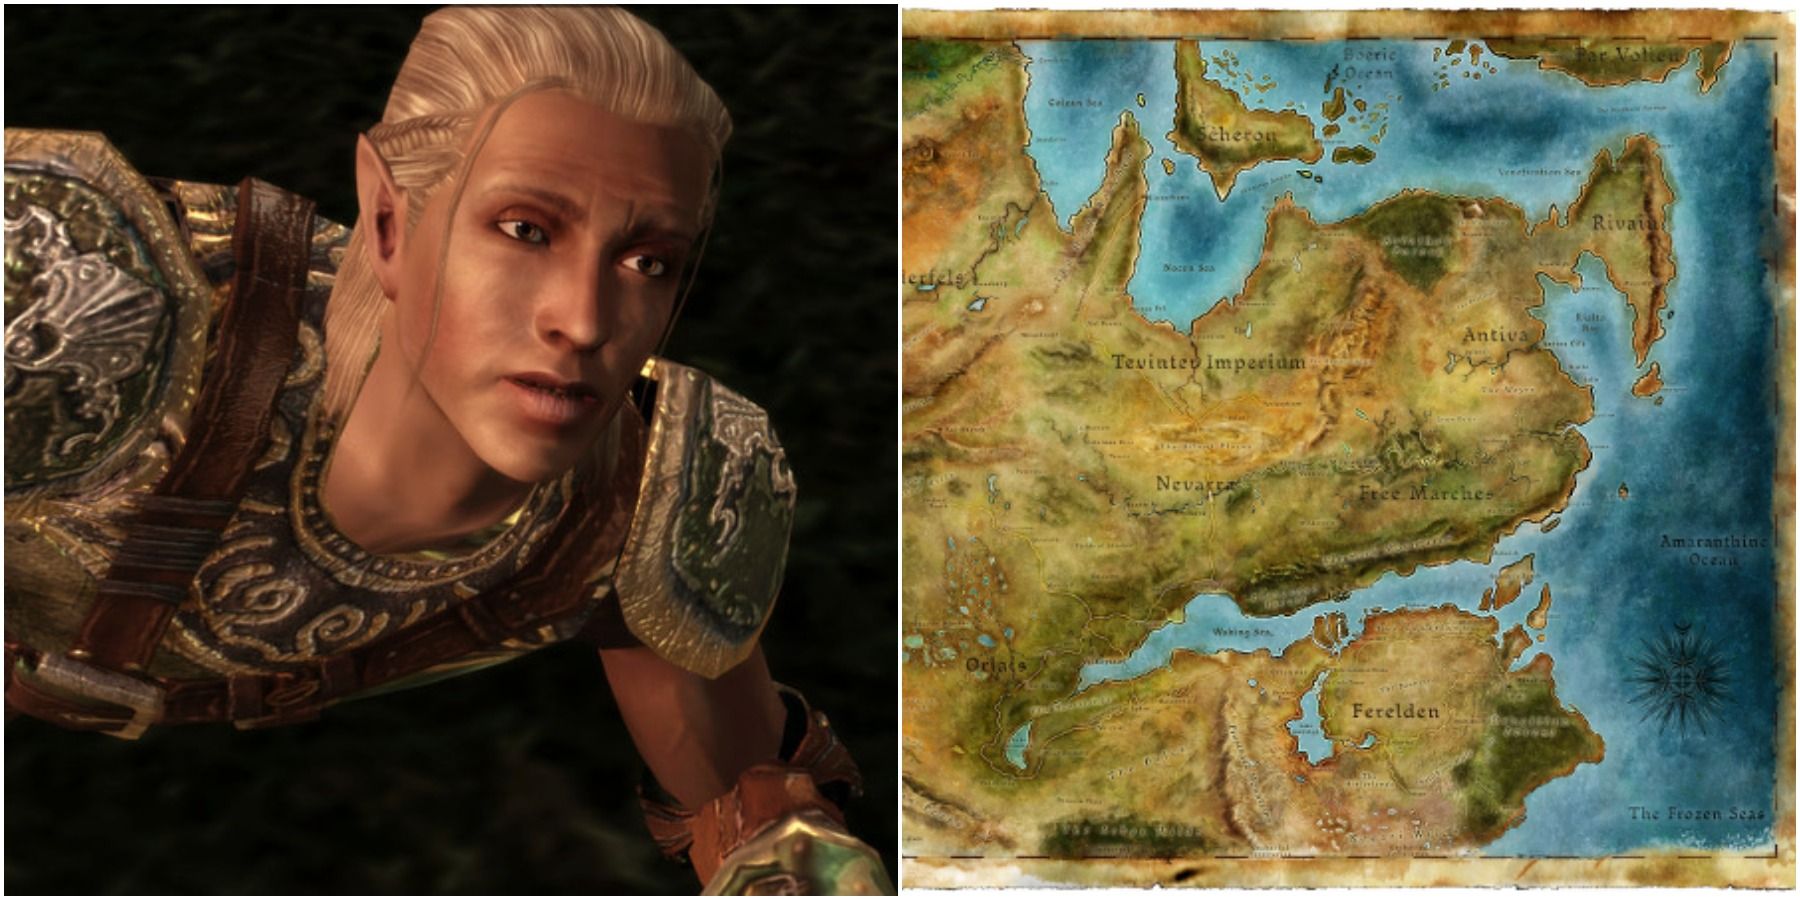 Split image of Zevran with map of Thedas.